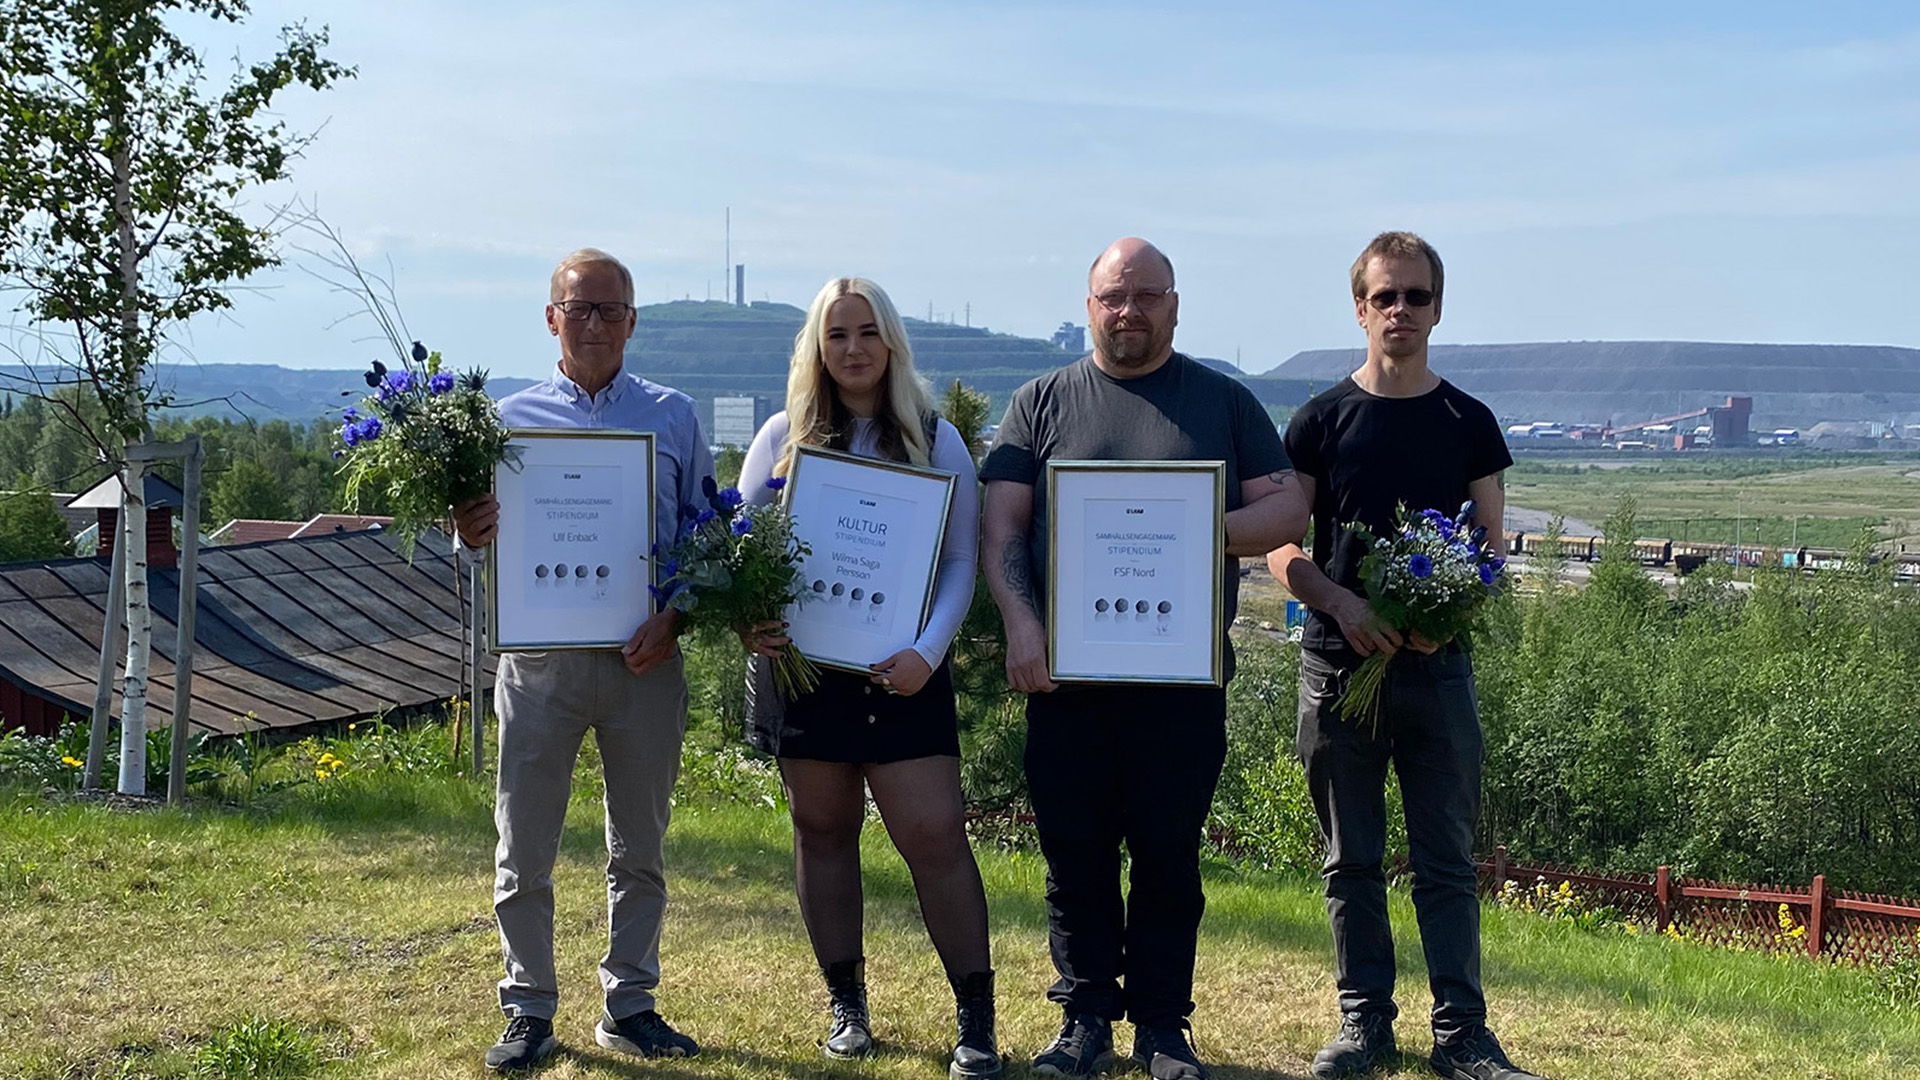 Group of people holding diplomas and flowers.